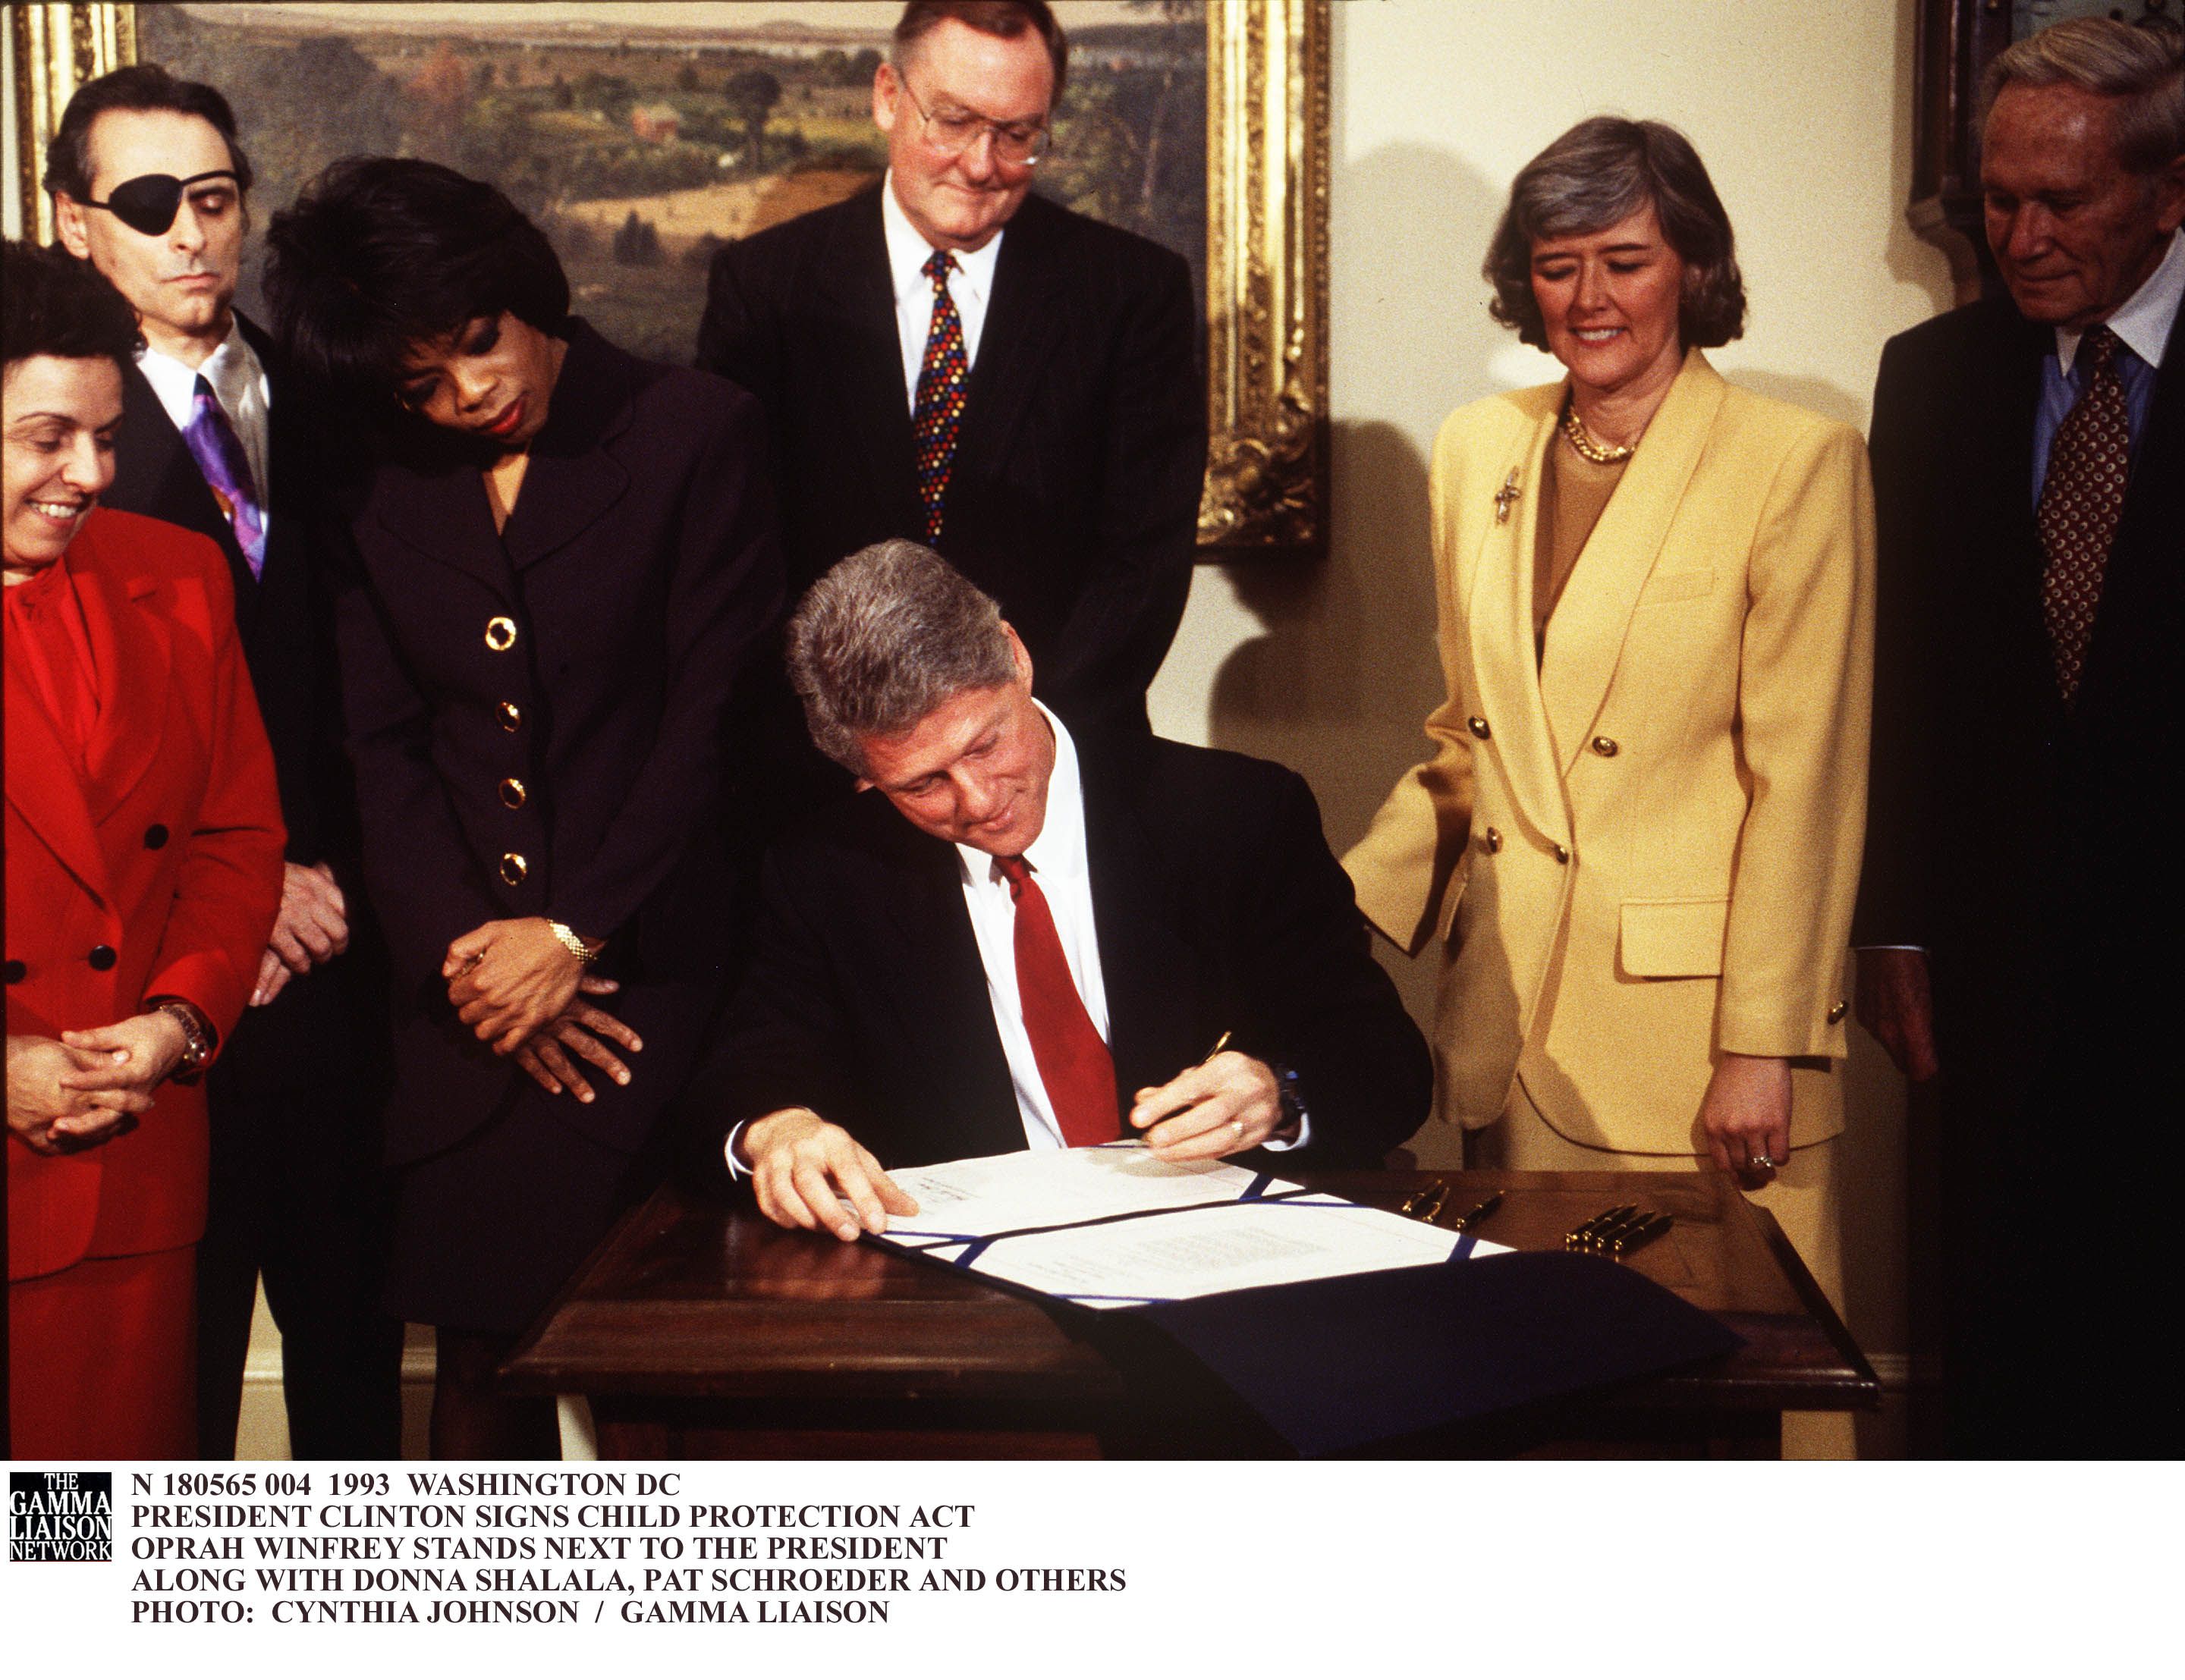 N 180565 004 1993 Washington Dc President Clinton Signs Child Protection Act Oprah Winfrey Stands Next To The President Along With Donna Shalala, Pat Schroeder And Others (Photo By Cynthia Johnson/Getty Images)